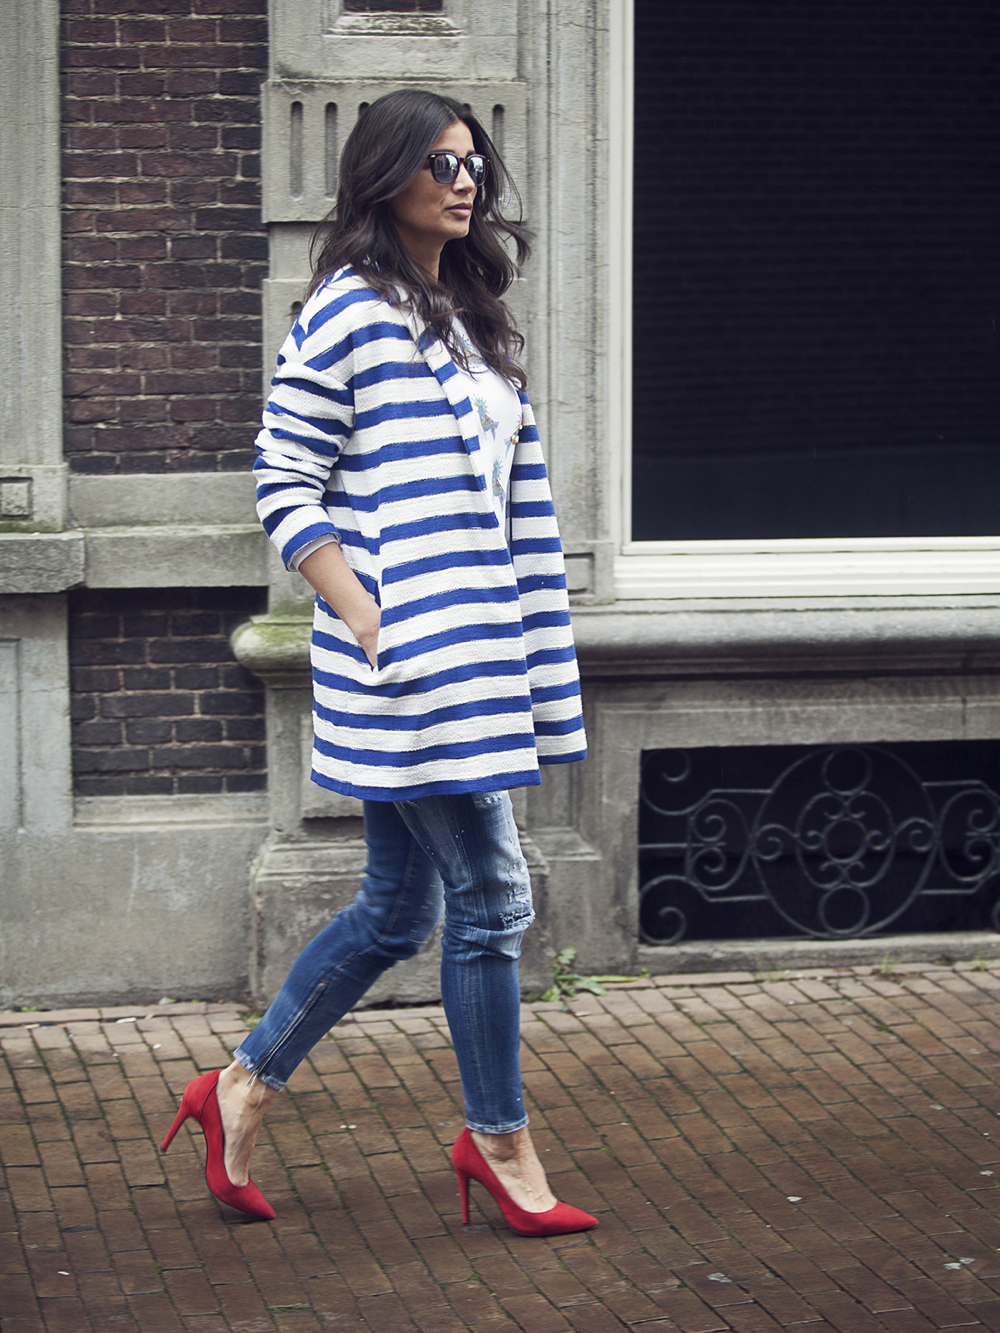 streetstyle look street photography spring 2015 stripes breton red pumps Pinko Dsquared BlogForShops